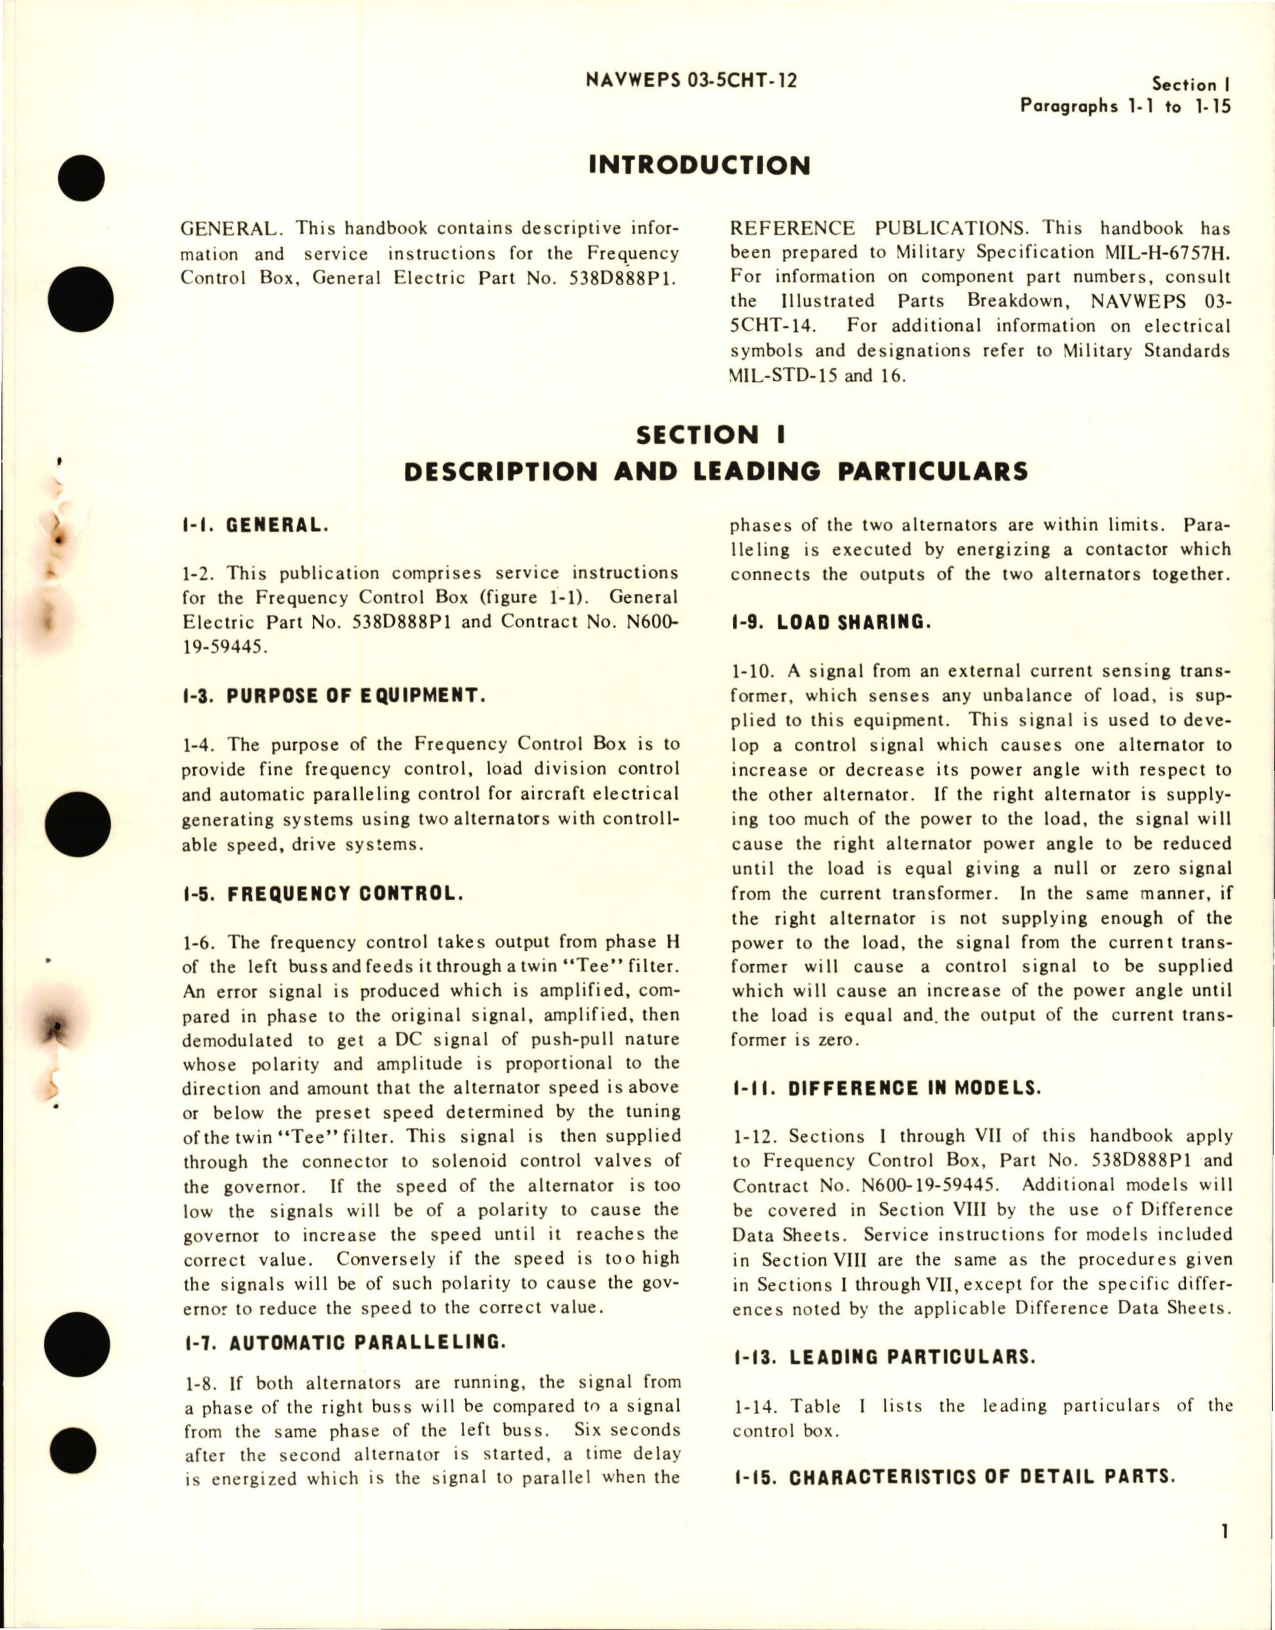 Sample page 5 from AirCorps Library document: Operation and Service Instructions for Frequency Control Box for 538D888P1